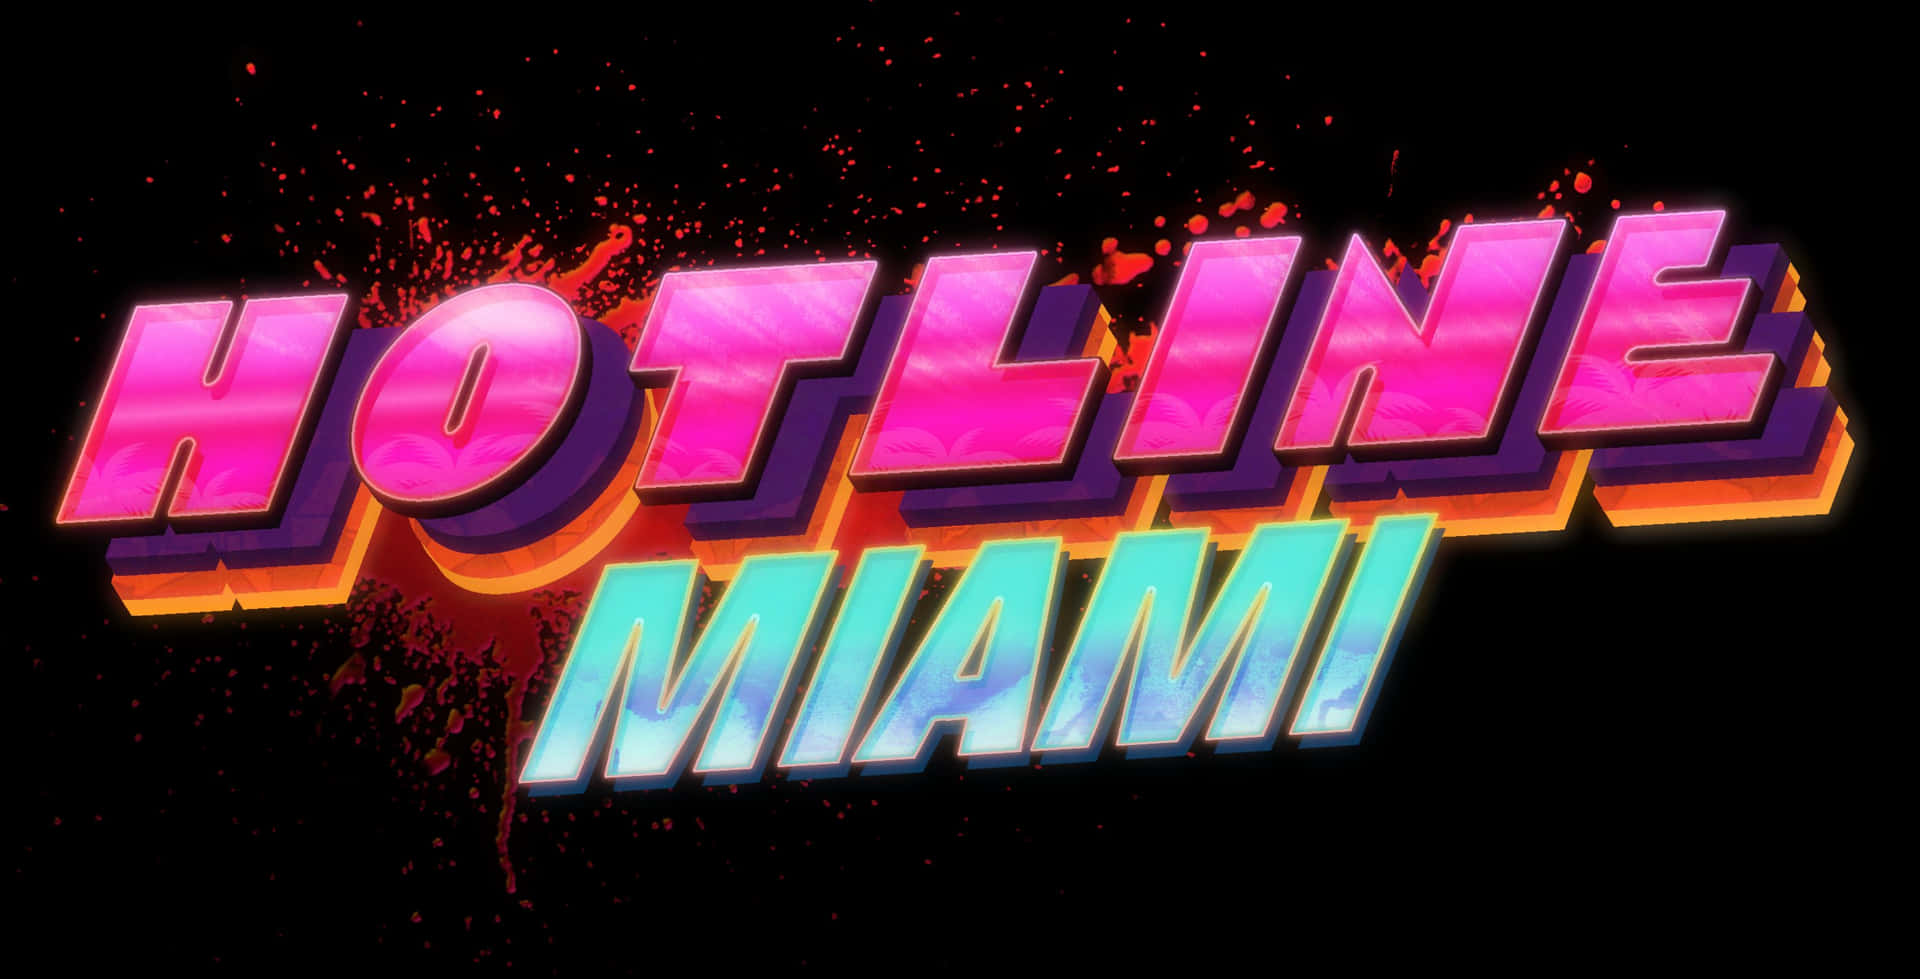 Hotline Miami Background: Neon-Lit Cityscape and Masked Character